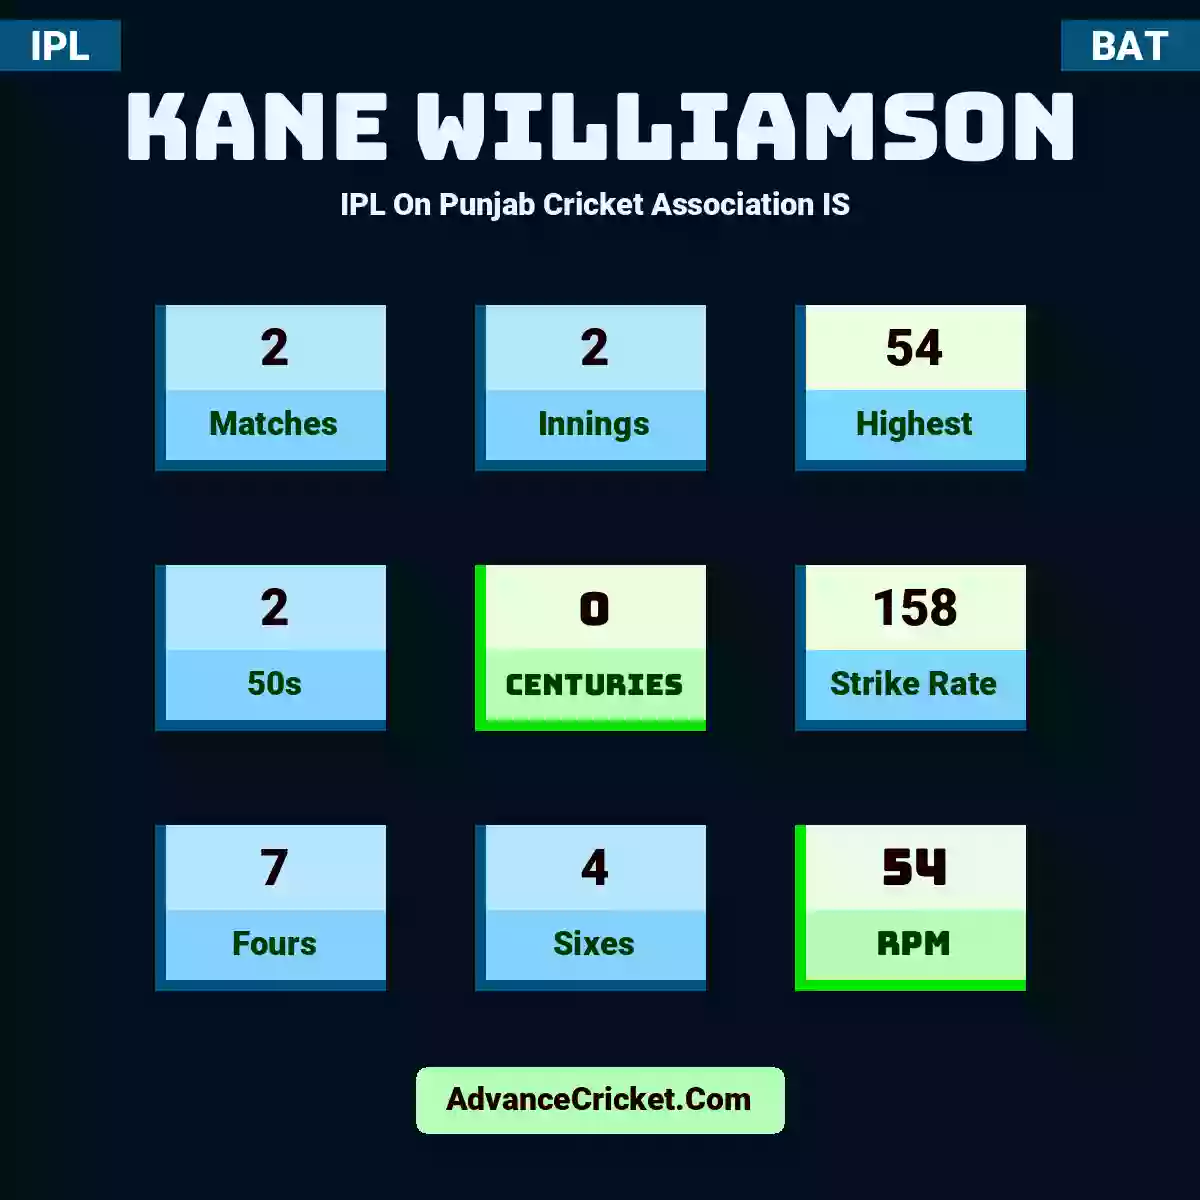 Kane Williamson IPL  On Punjab Cricket Association IS , Kane Williamson played 2 matches, scored 54 runs as highest, 2 half-centuries, and 0 centuries, with a strike rate of 158. K.Williamson hit 7 fours and 4 sixes, with an RPM of 54.